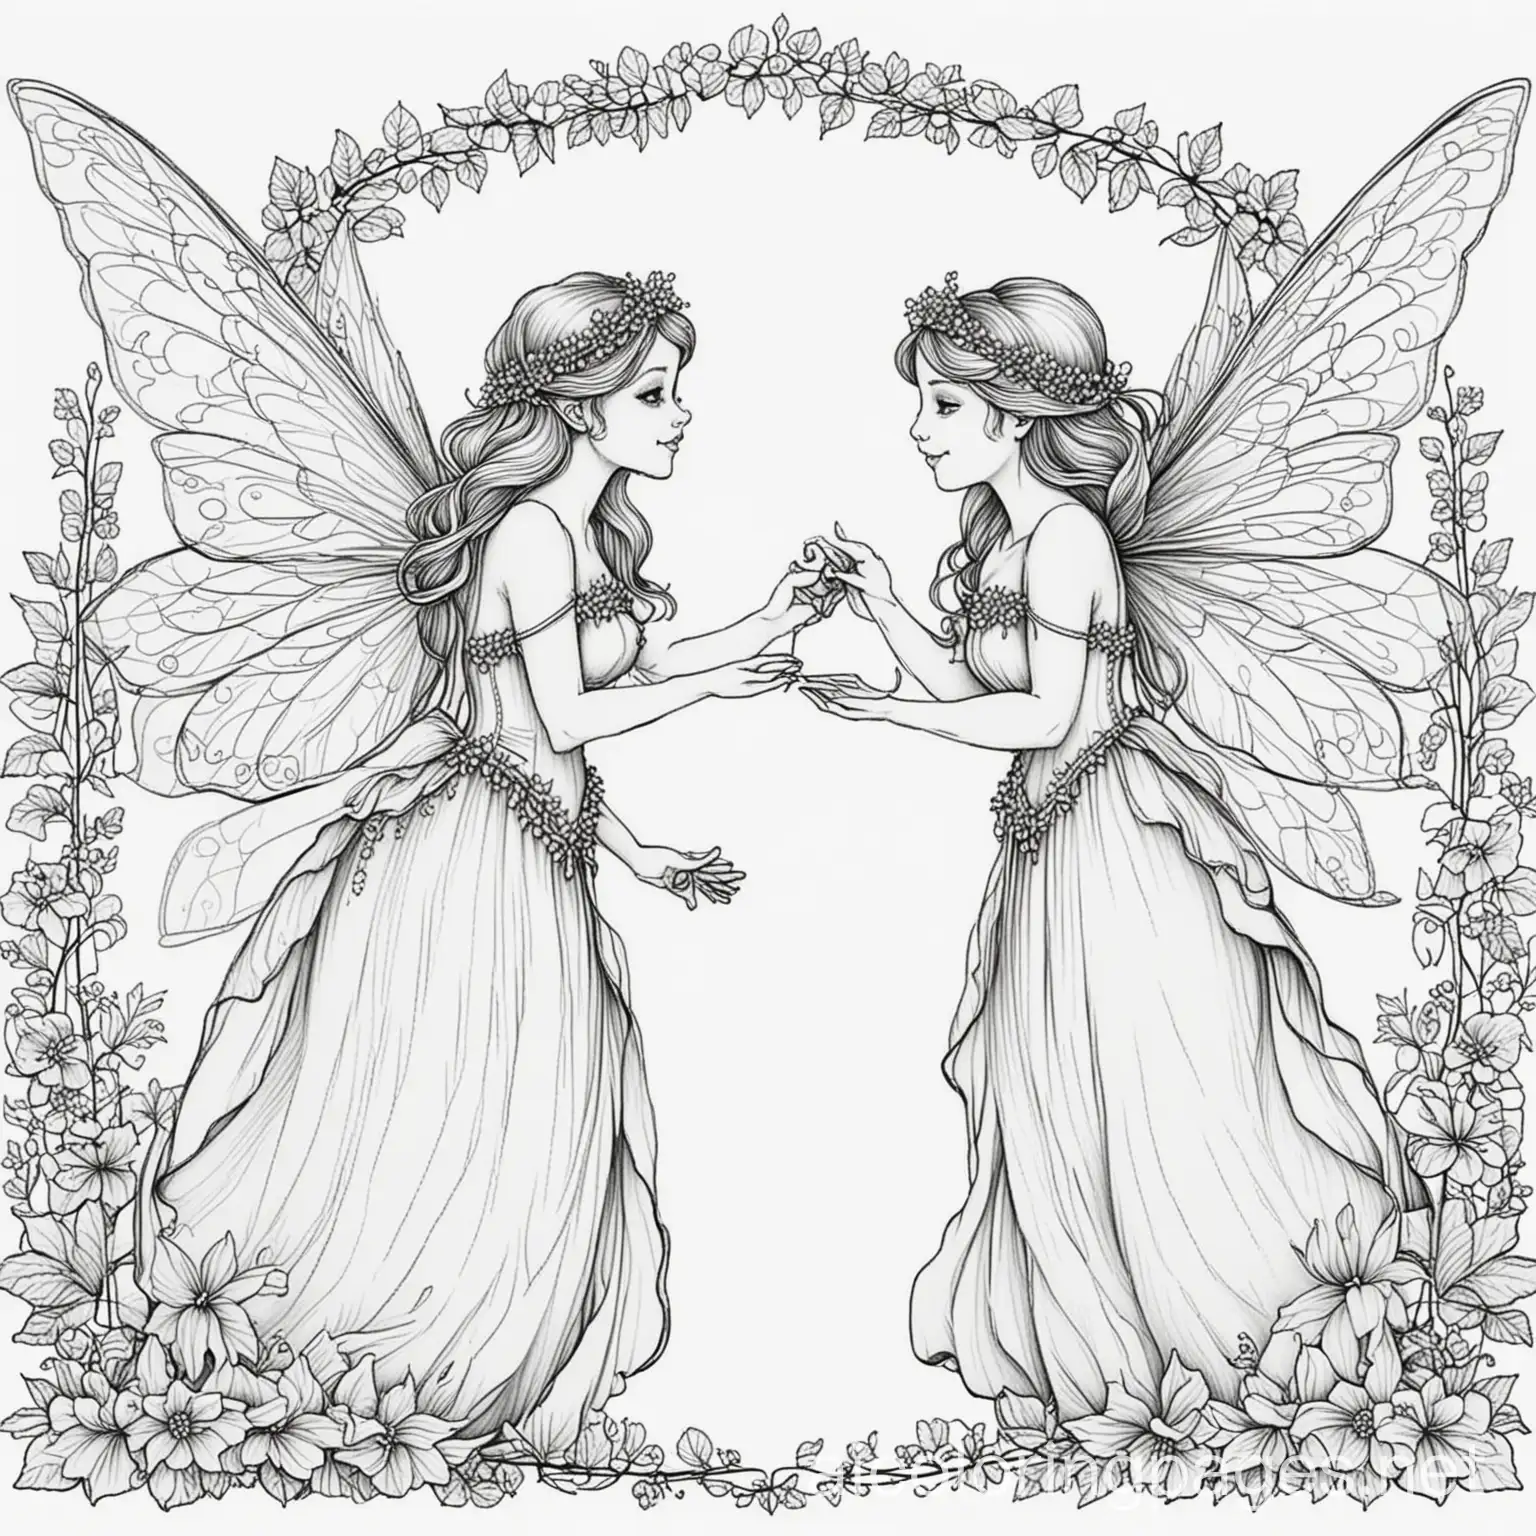 Fairy-Wedding-Coloring-Page-for-Kids-Simple-Black-and-White-Line-Art